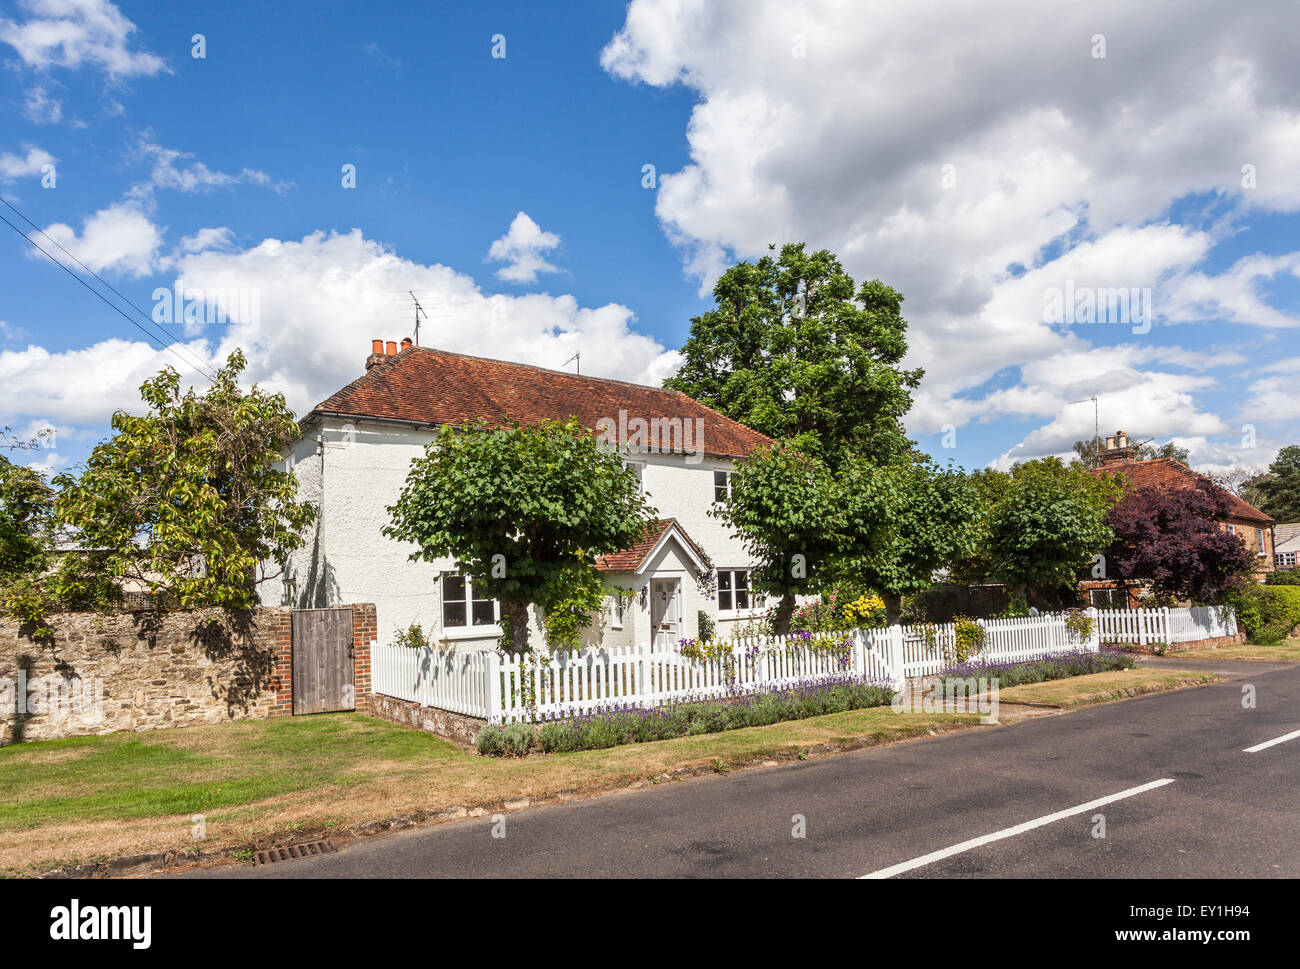 Pretty white cottage with picket fence in Eashing, Shackleford, a small village in Surrey, south-east England on a summer's day with blue sky Stock Photo